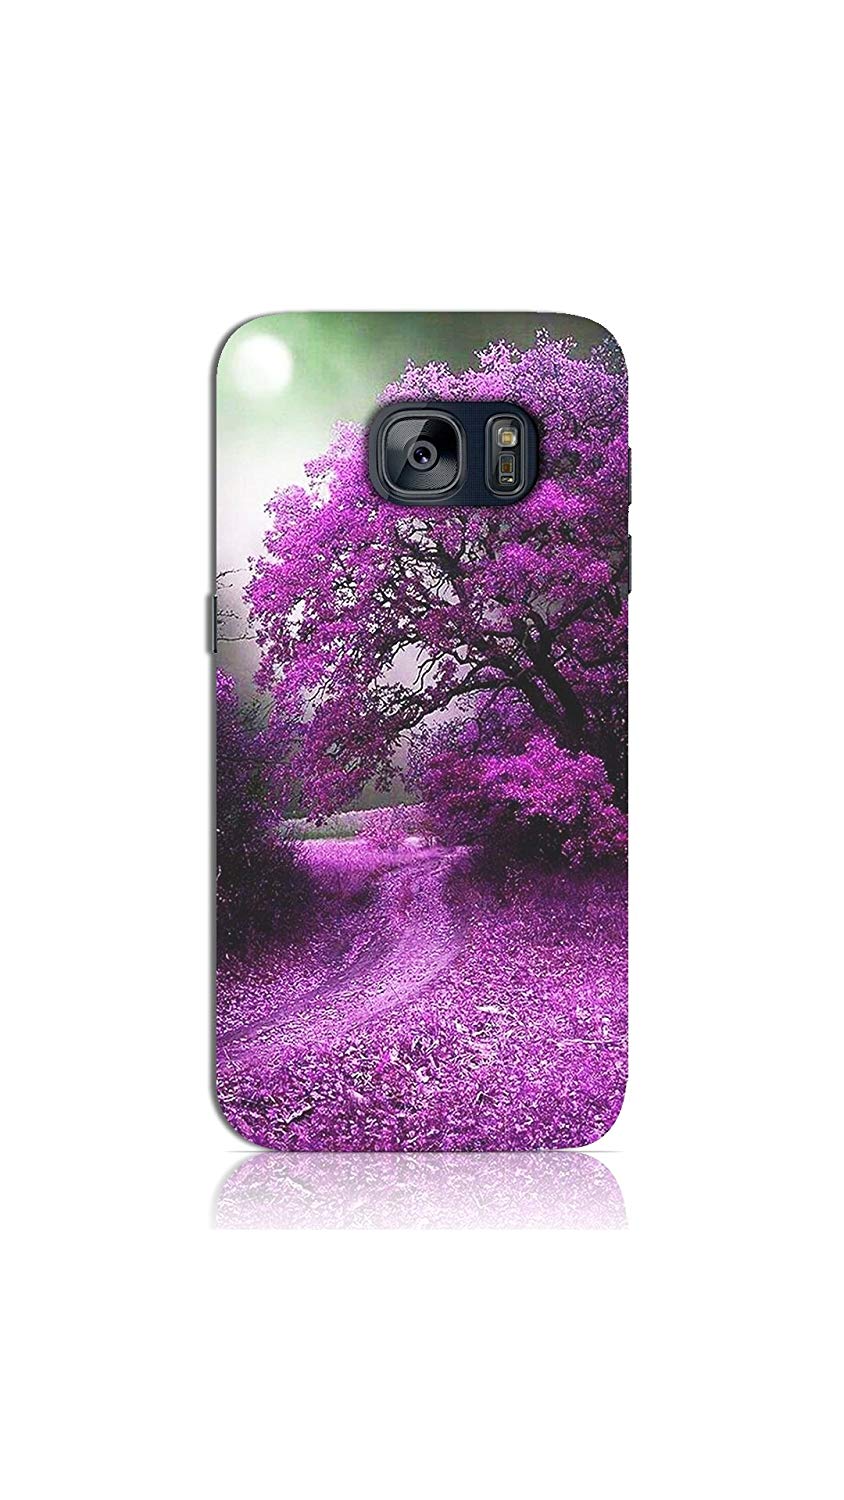 Beautiful Nature Wallpaper Case For Samsung Galaxy - Mobile Phone Case - HD Wallpaper 